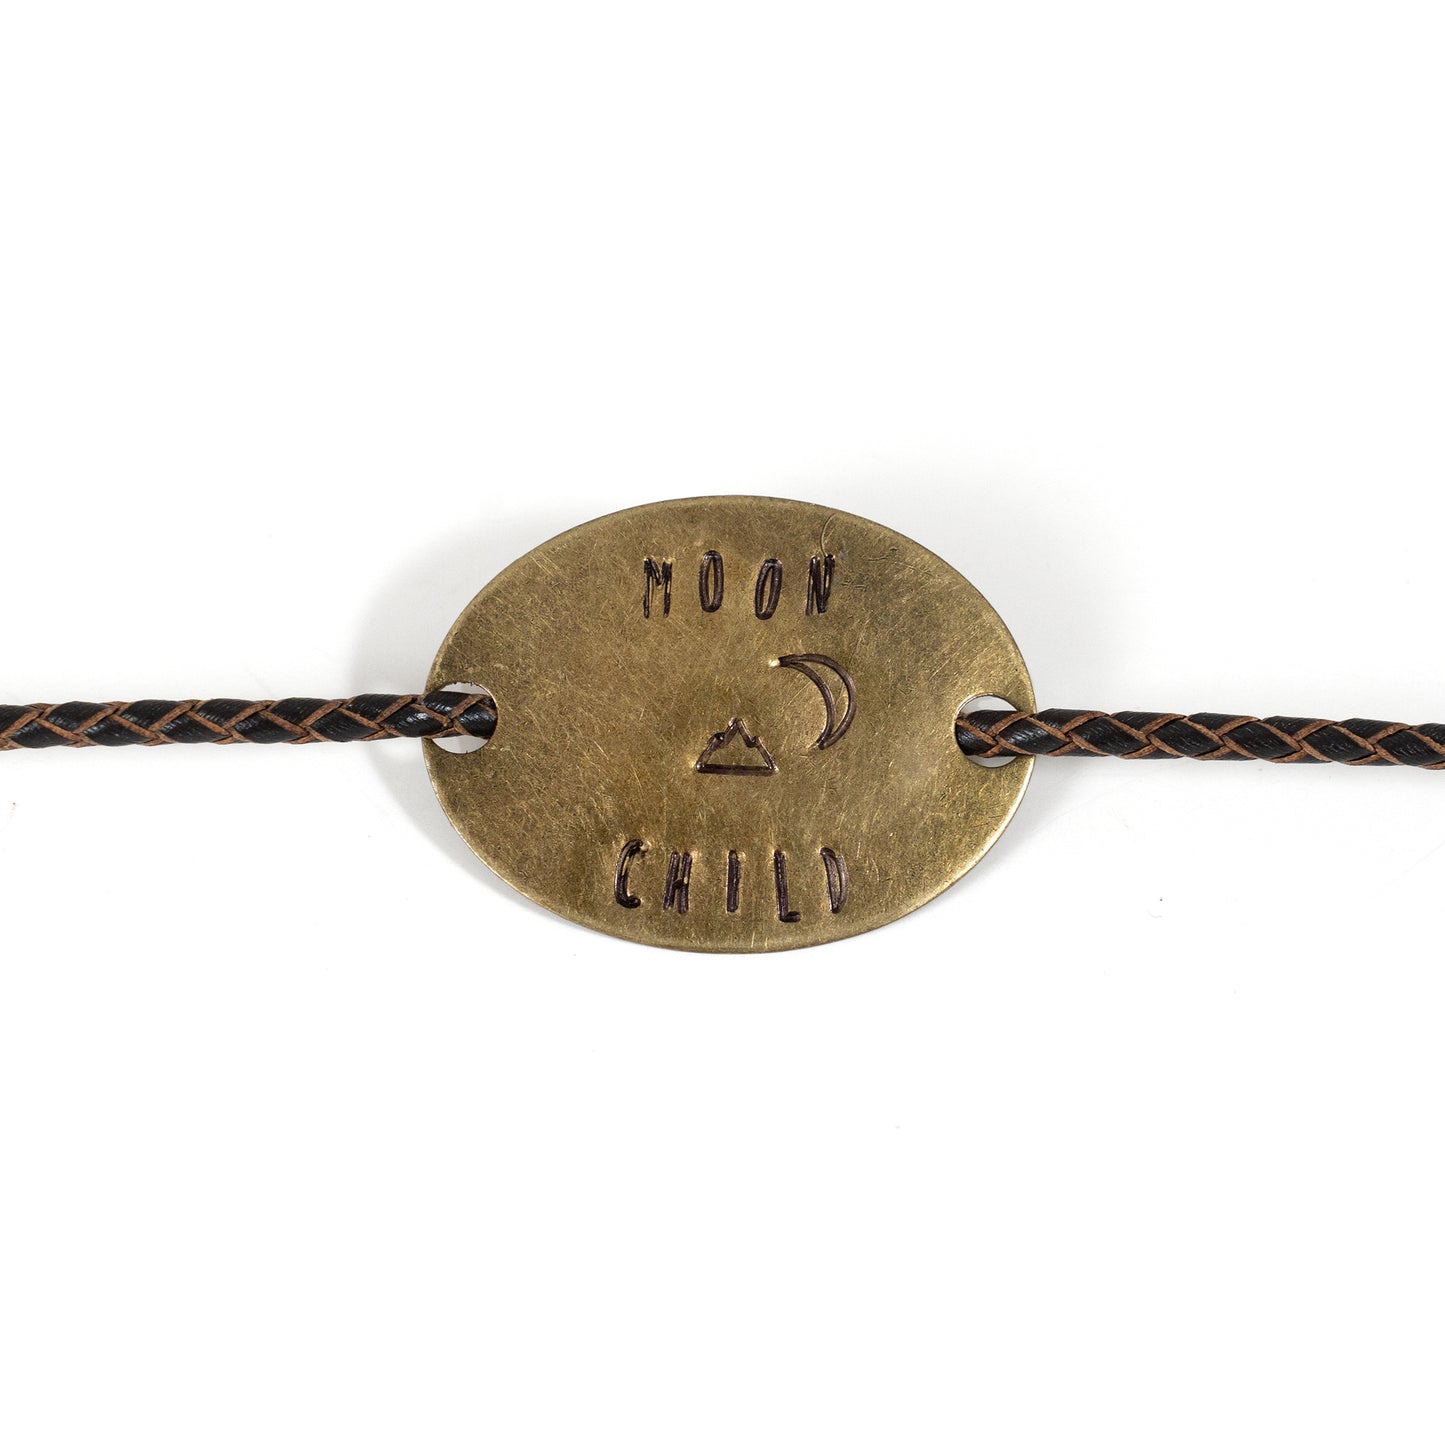 Metal Hat Medallion on Leather Braided Cord